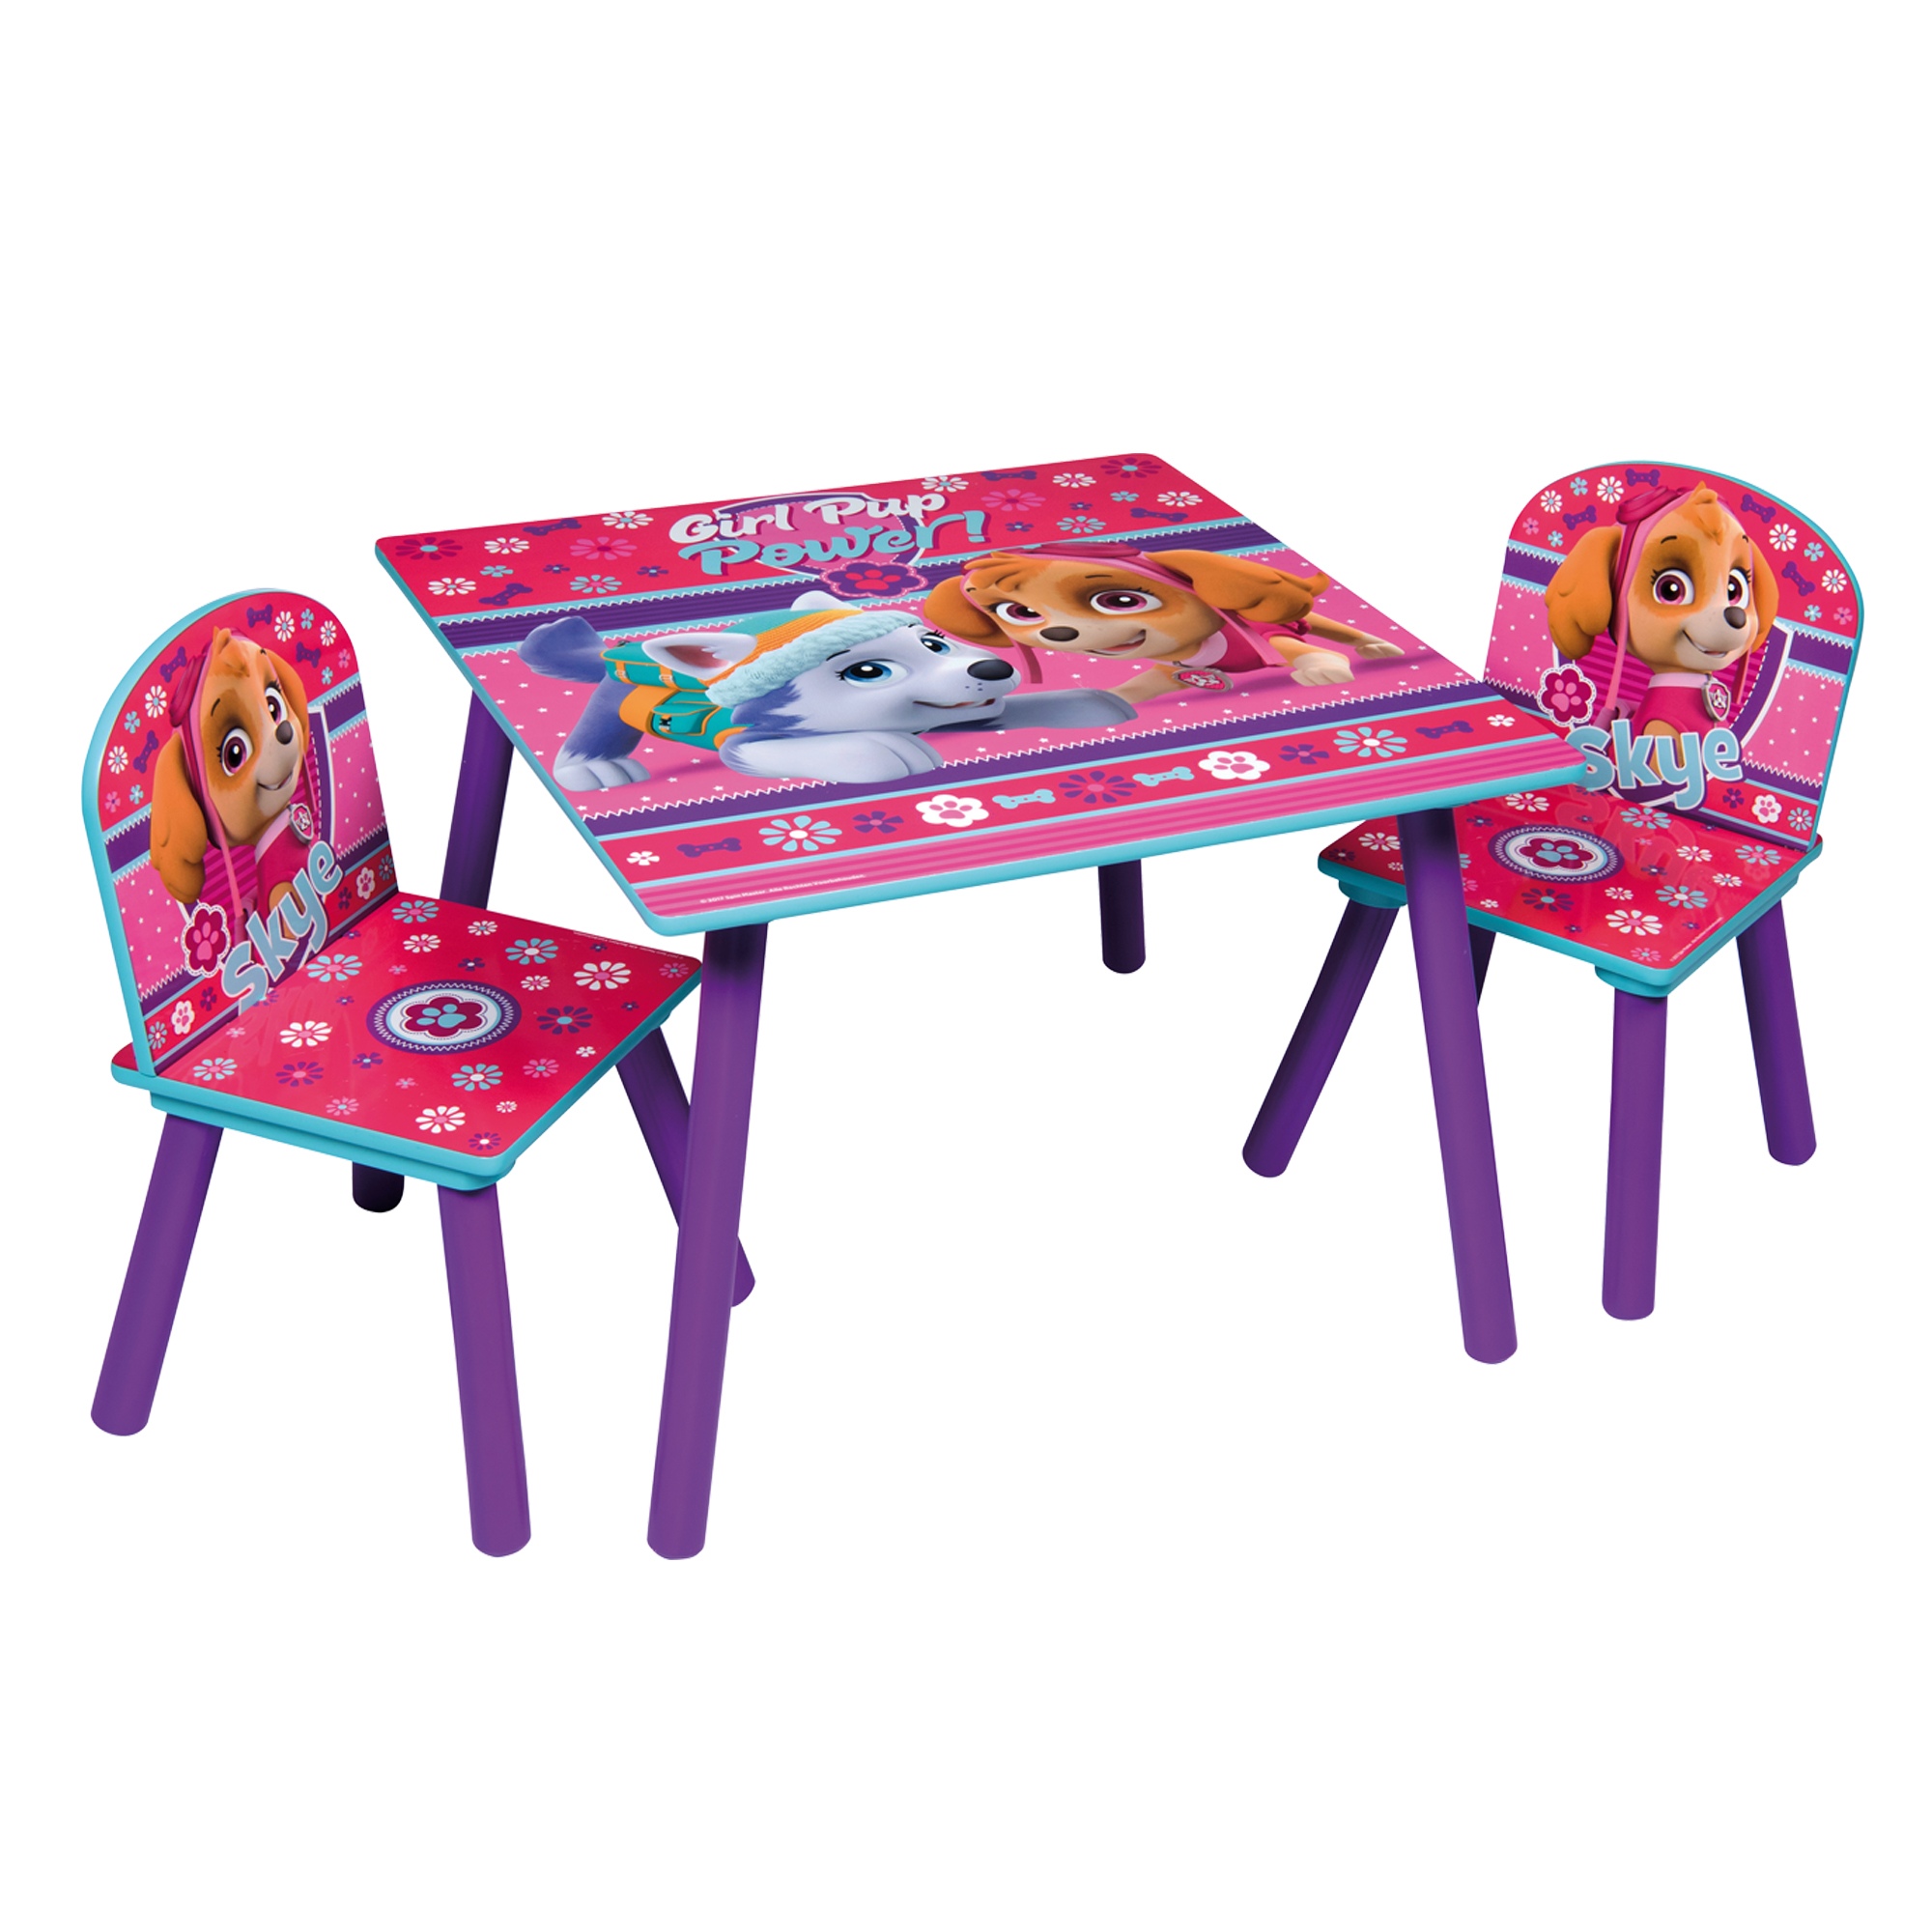 details about paw patrol themed pink table and chair set wooden activity  playroom furniture